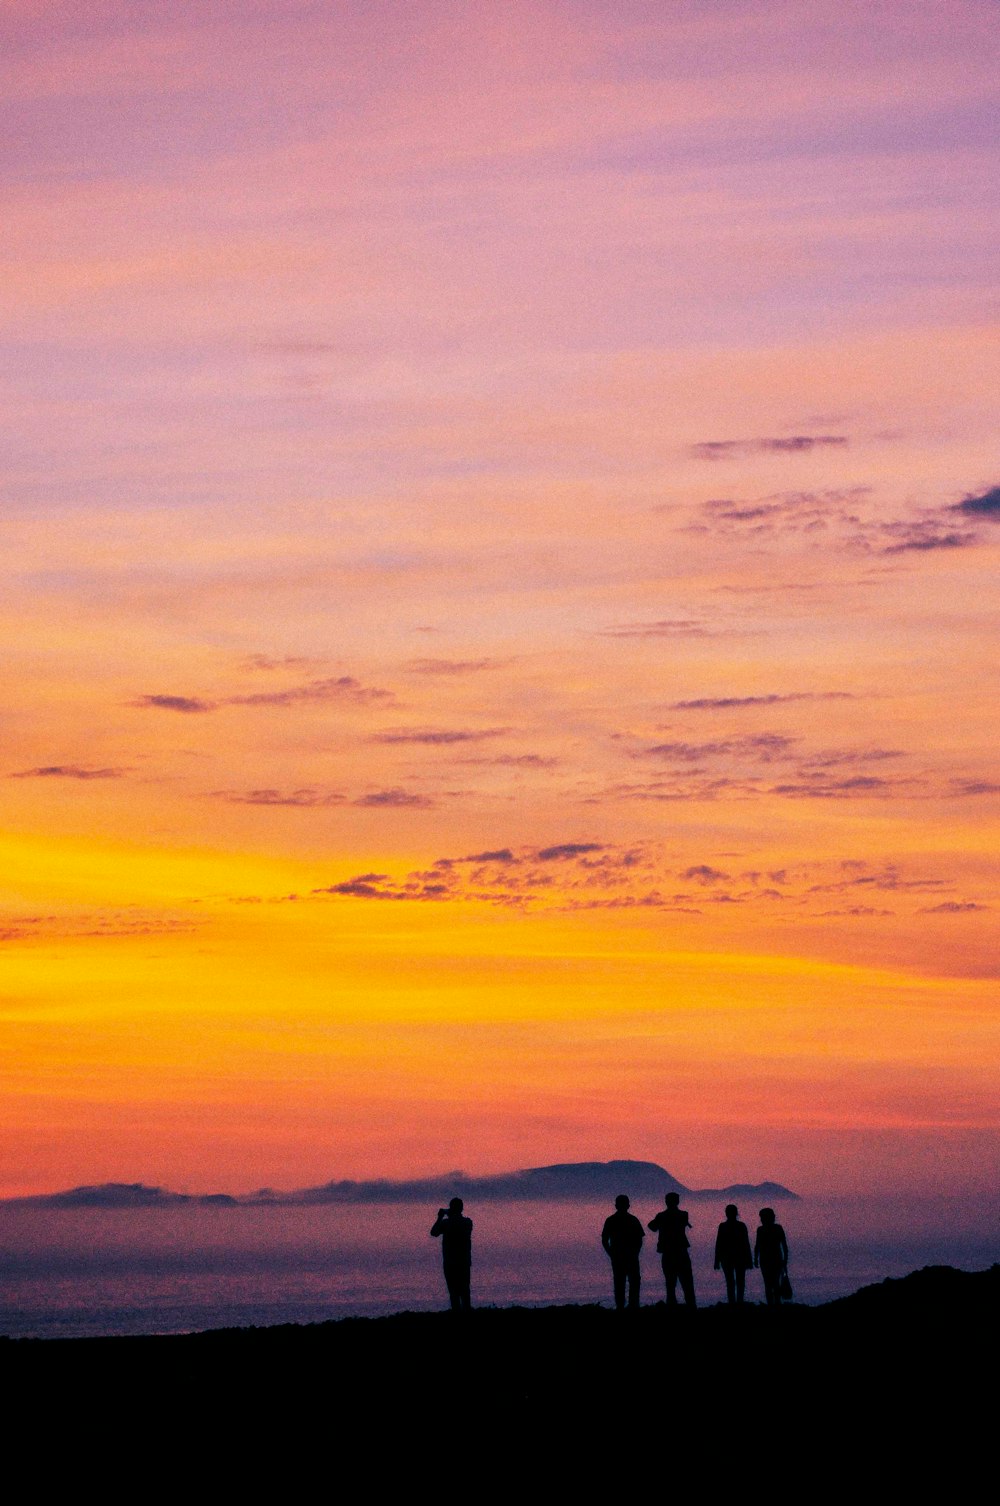 silhouette of people on mountain during sunset